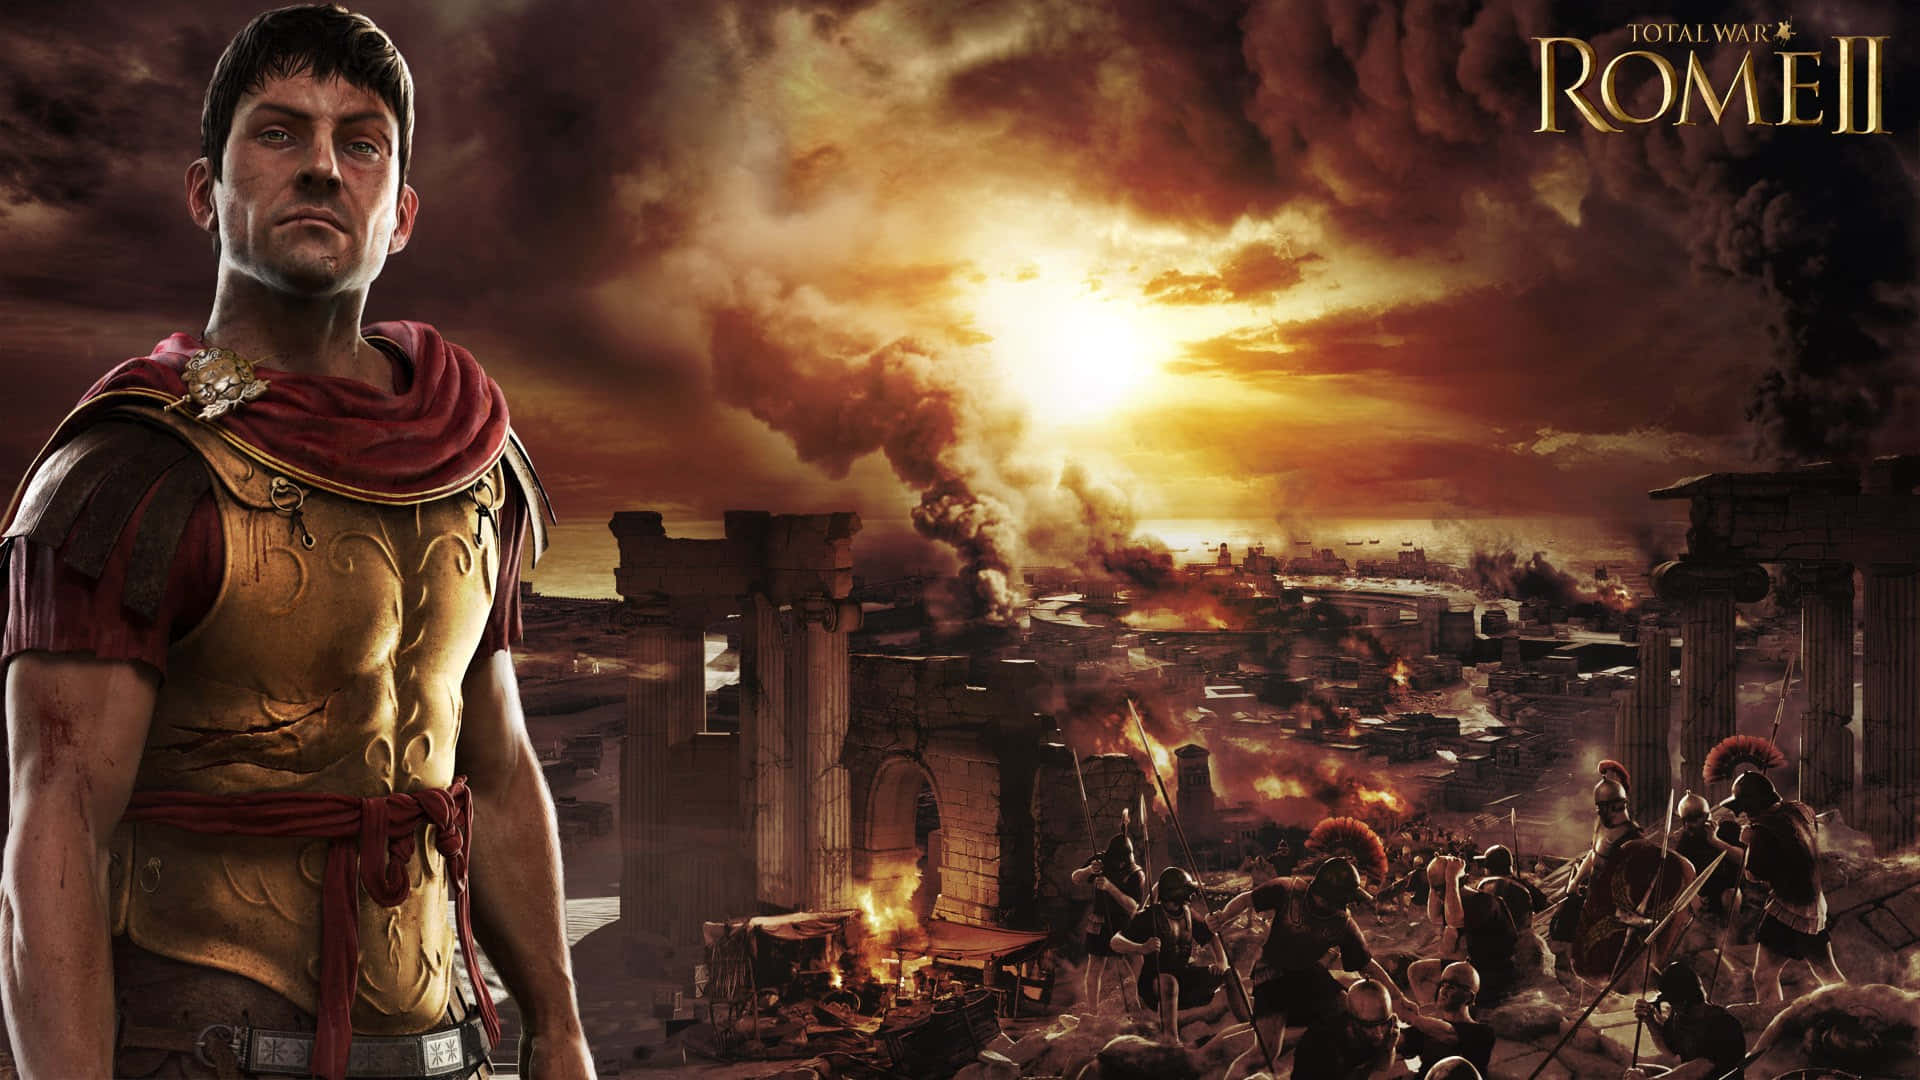 “Total War: Rome 2 - Forge new alliances and conquer the world.”